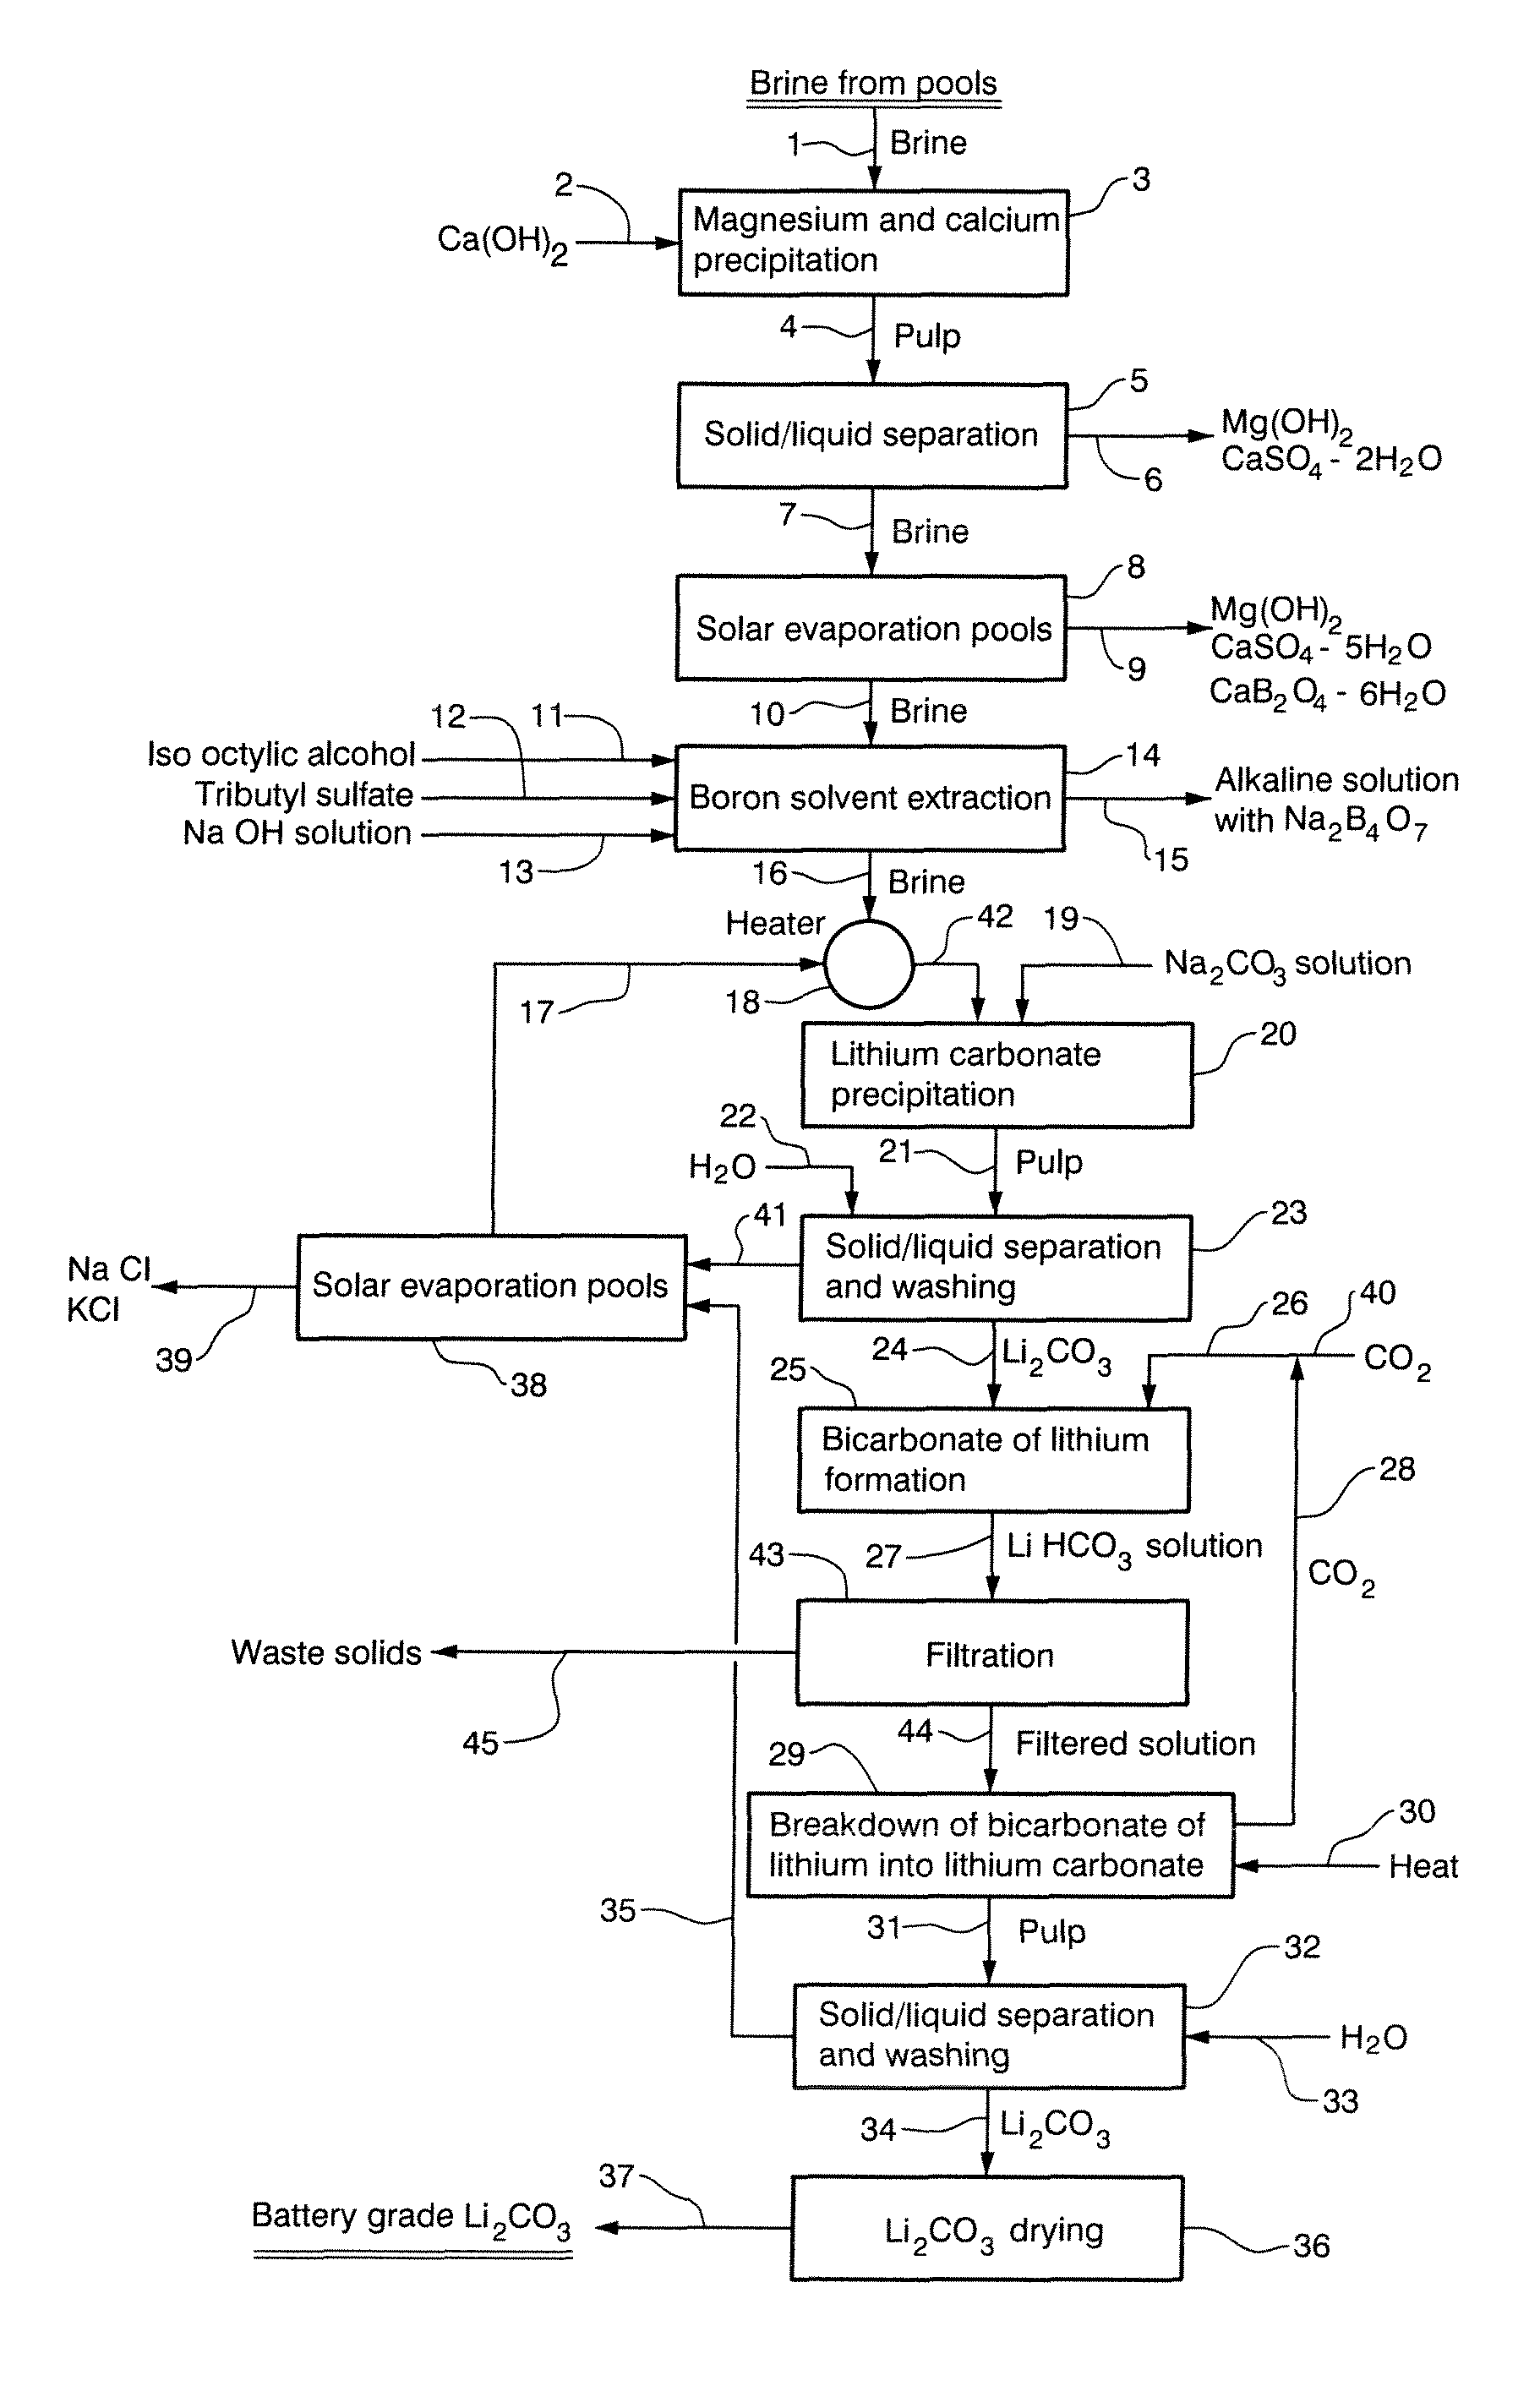 Method for the production of battery grade lithium carbonate from natural and industrial brines